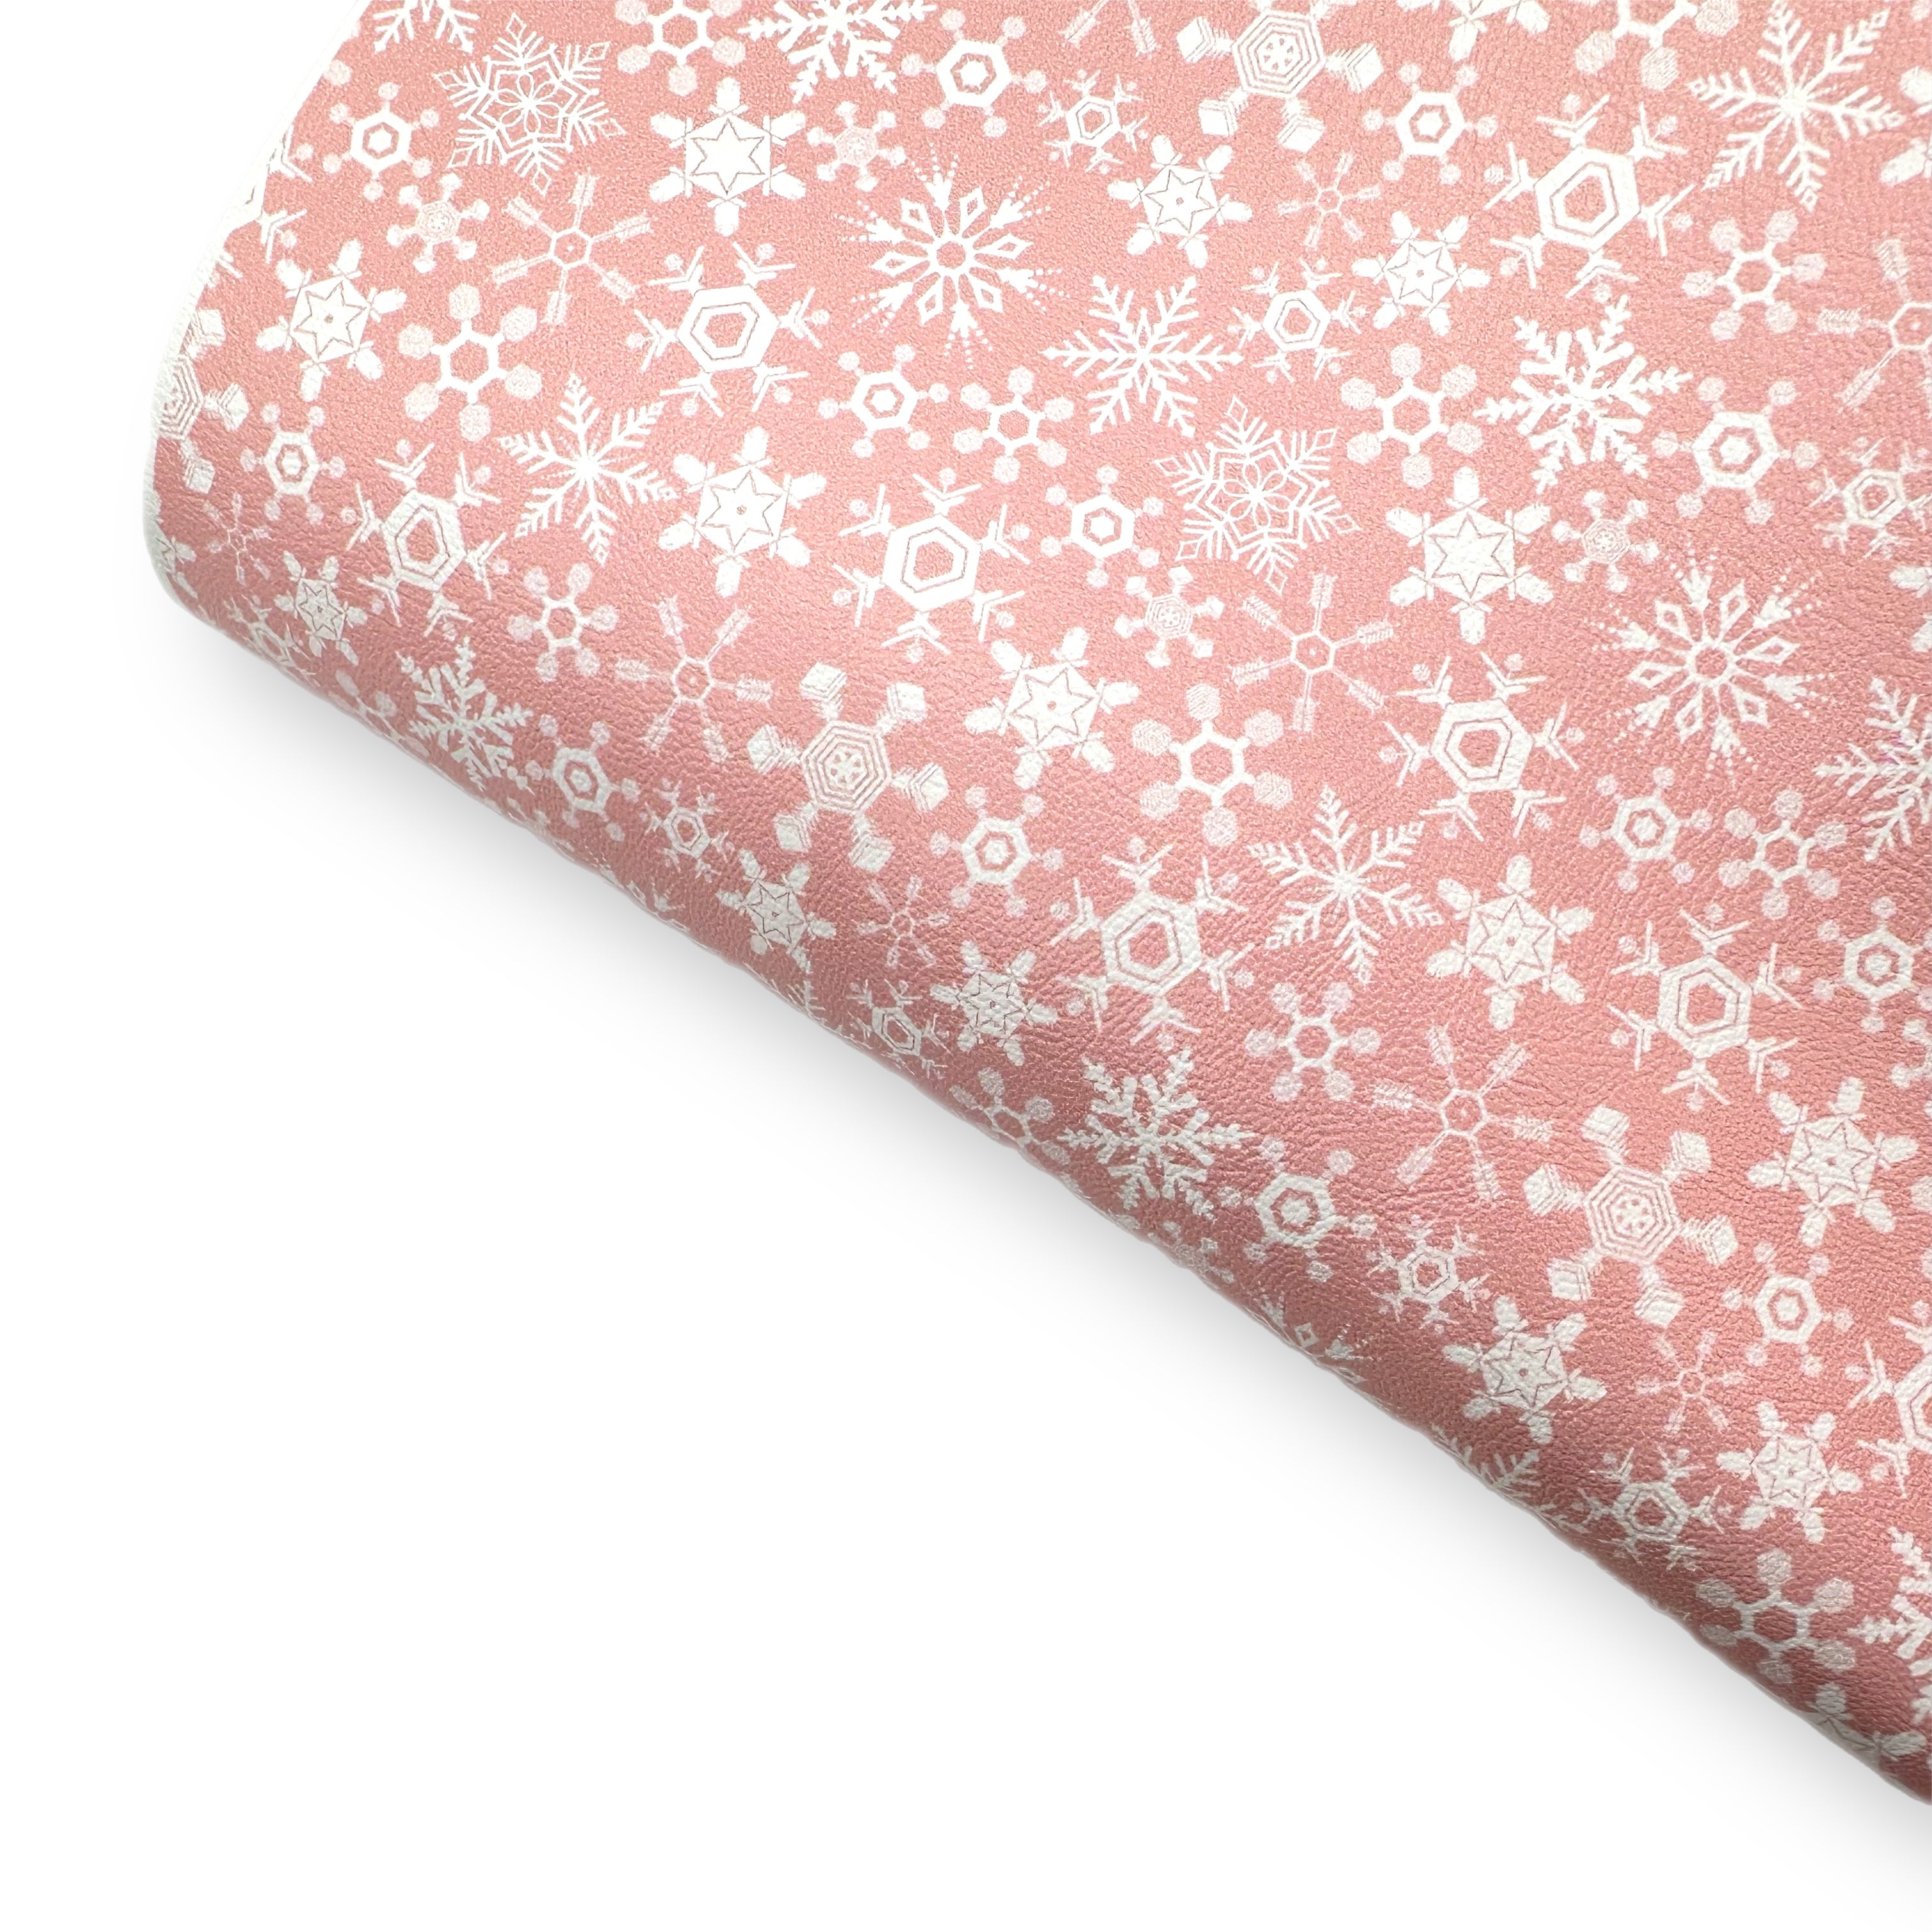 Snow is Falling Premium Faux Leather Fabric Sheets